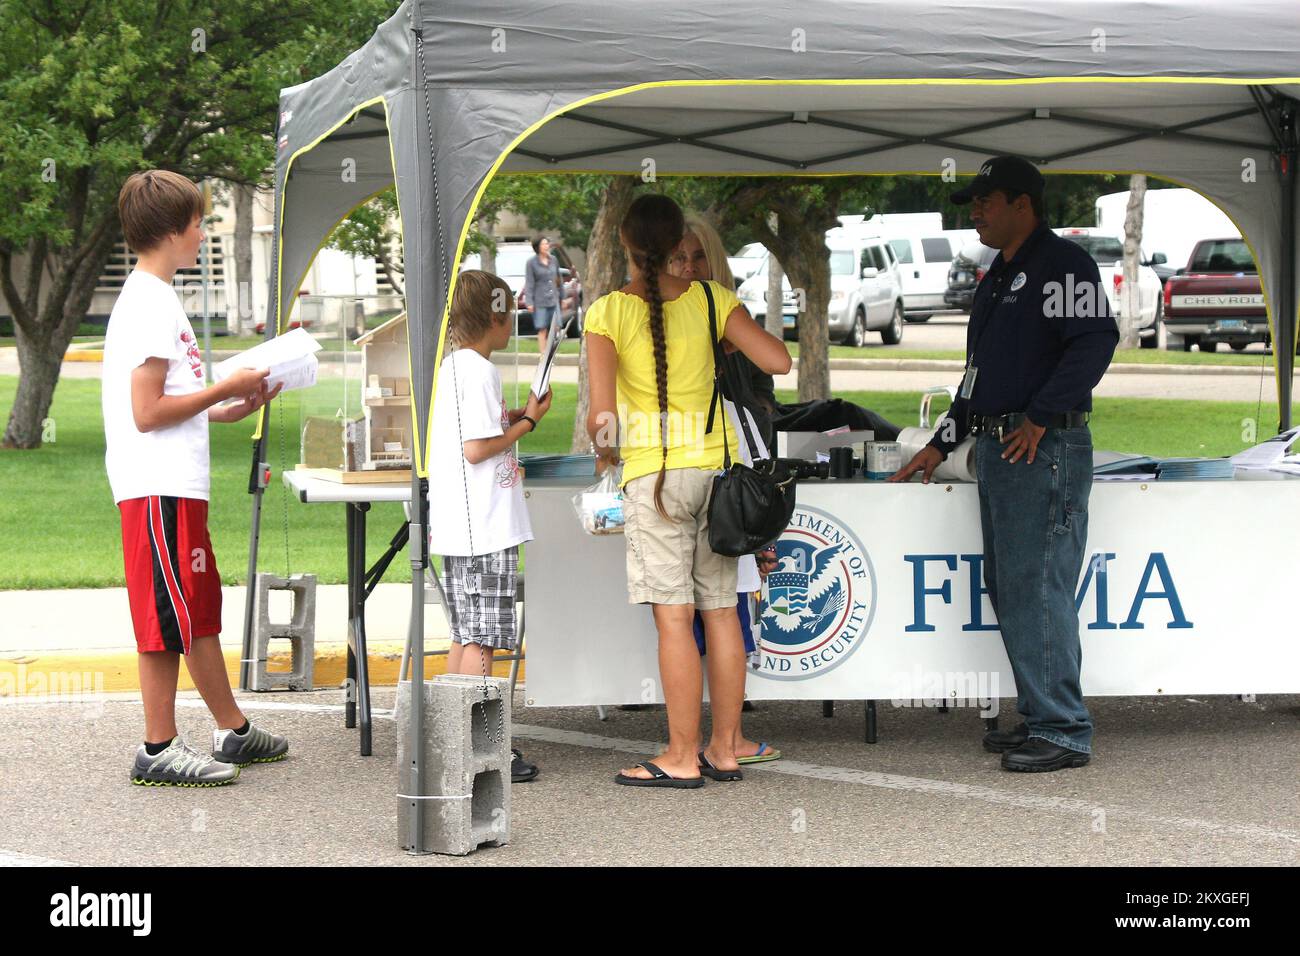 Flooding - Bismarck, N. D. , August 6, 2011   FEMA Mitigation Liason Emiliano Flores, looks on as Community Relations Specialist Hilda Rodriguez speaks to interested community members at the FEMA information Booth at the base of the North Dakota State Capitol Building in Bismarck during a yearly festival called the 'Capitol a'Fair. ' FEMA utilized their booth at the fair to promote mitigation ideas to the community as well as providing information on programs available to those affected by the flood. Robert Kaufmann/FEMA. North Dakota Flooding. Photographs Relating to Disasters and Emergency M Stock Photo